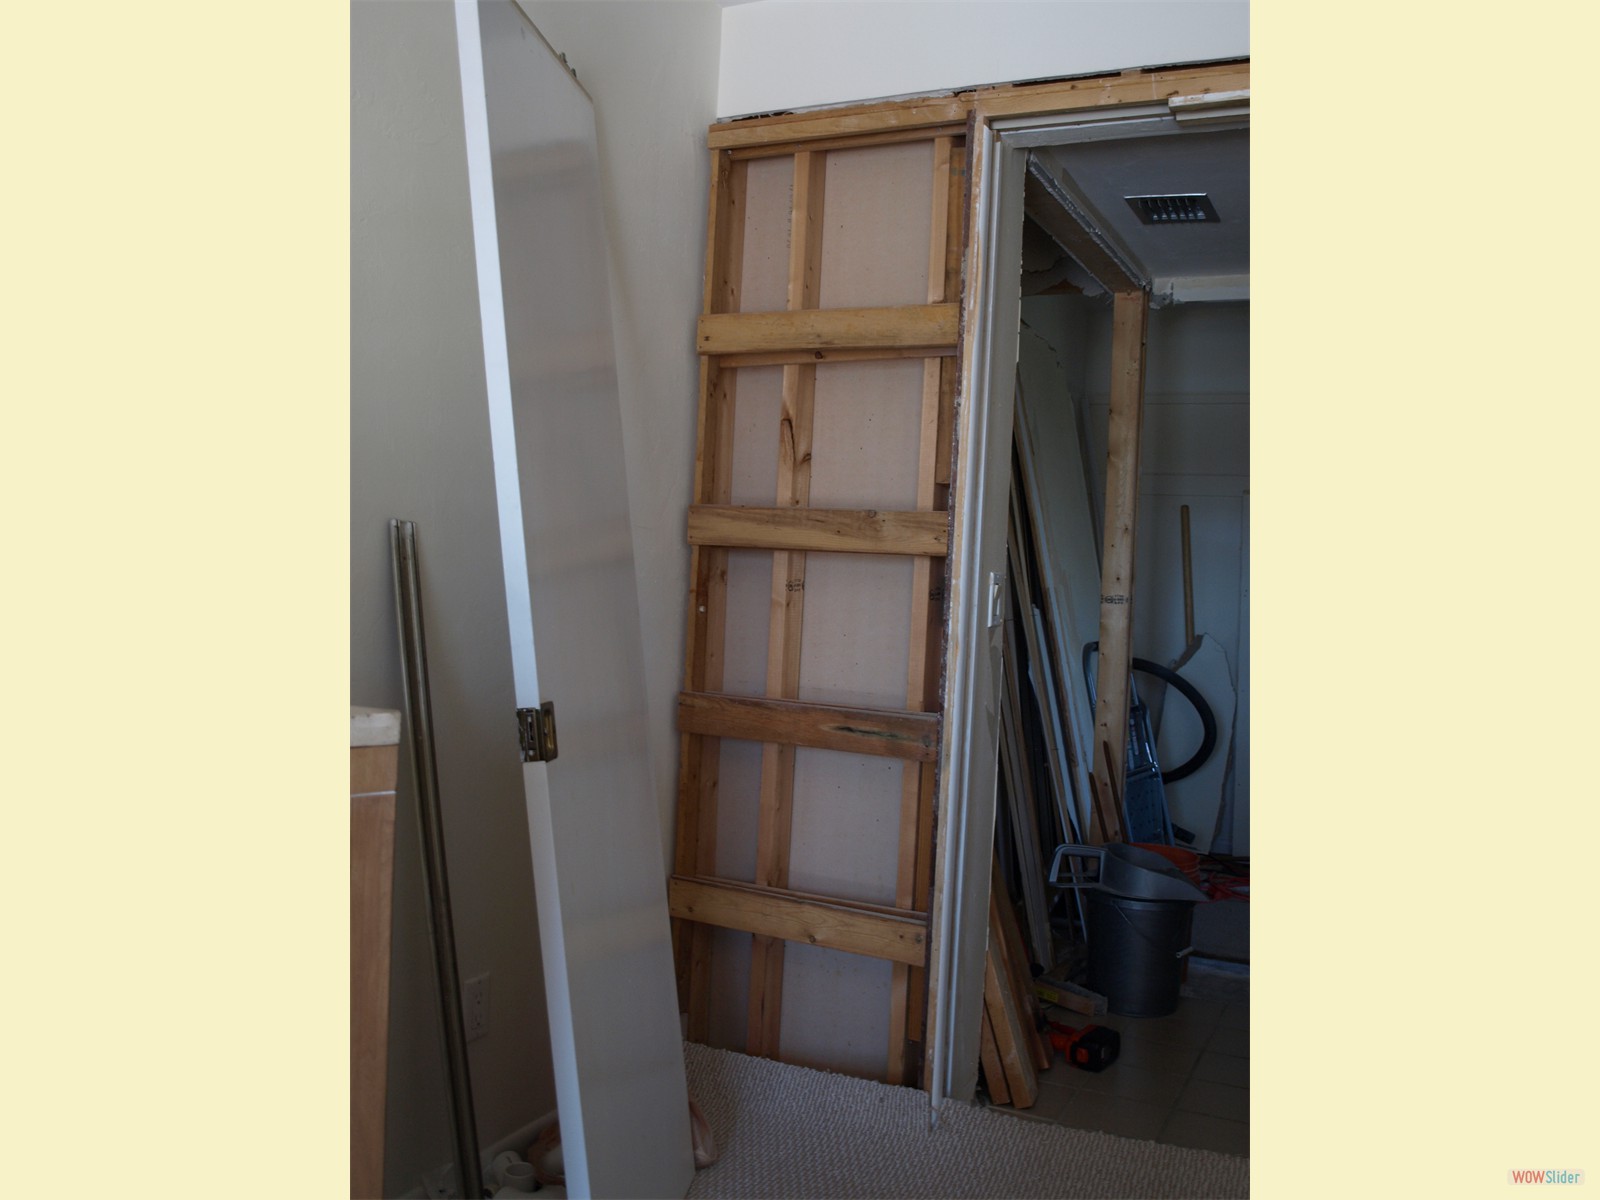 Frame of the left sliding door to the bathroom